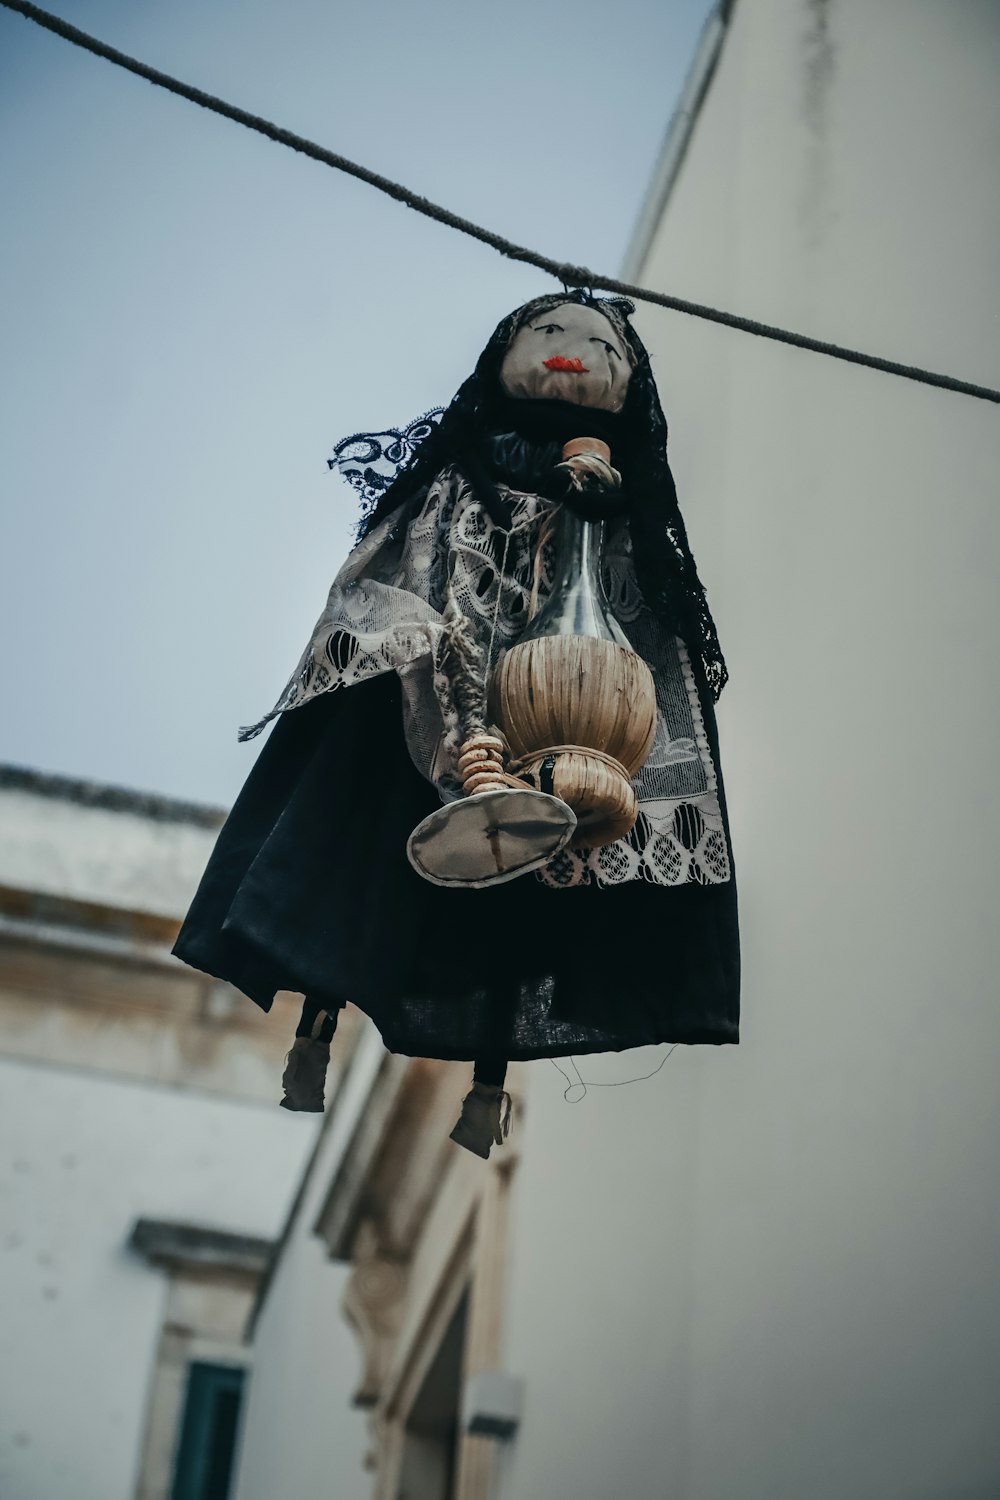 a creepy doll hanging from a clothes line